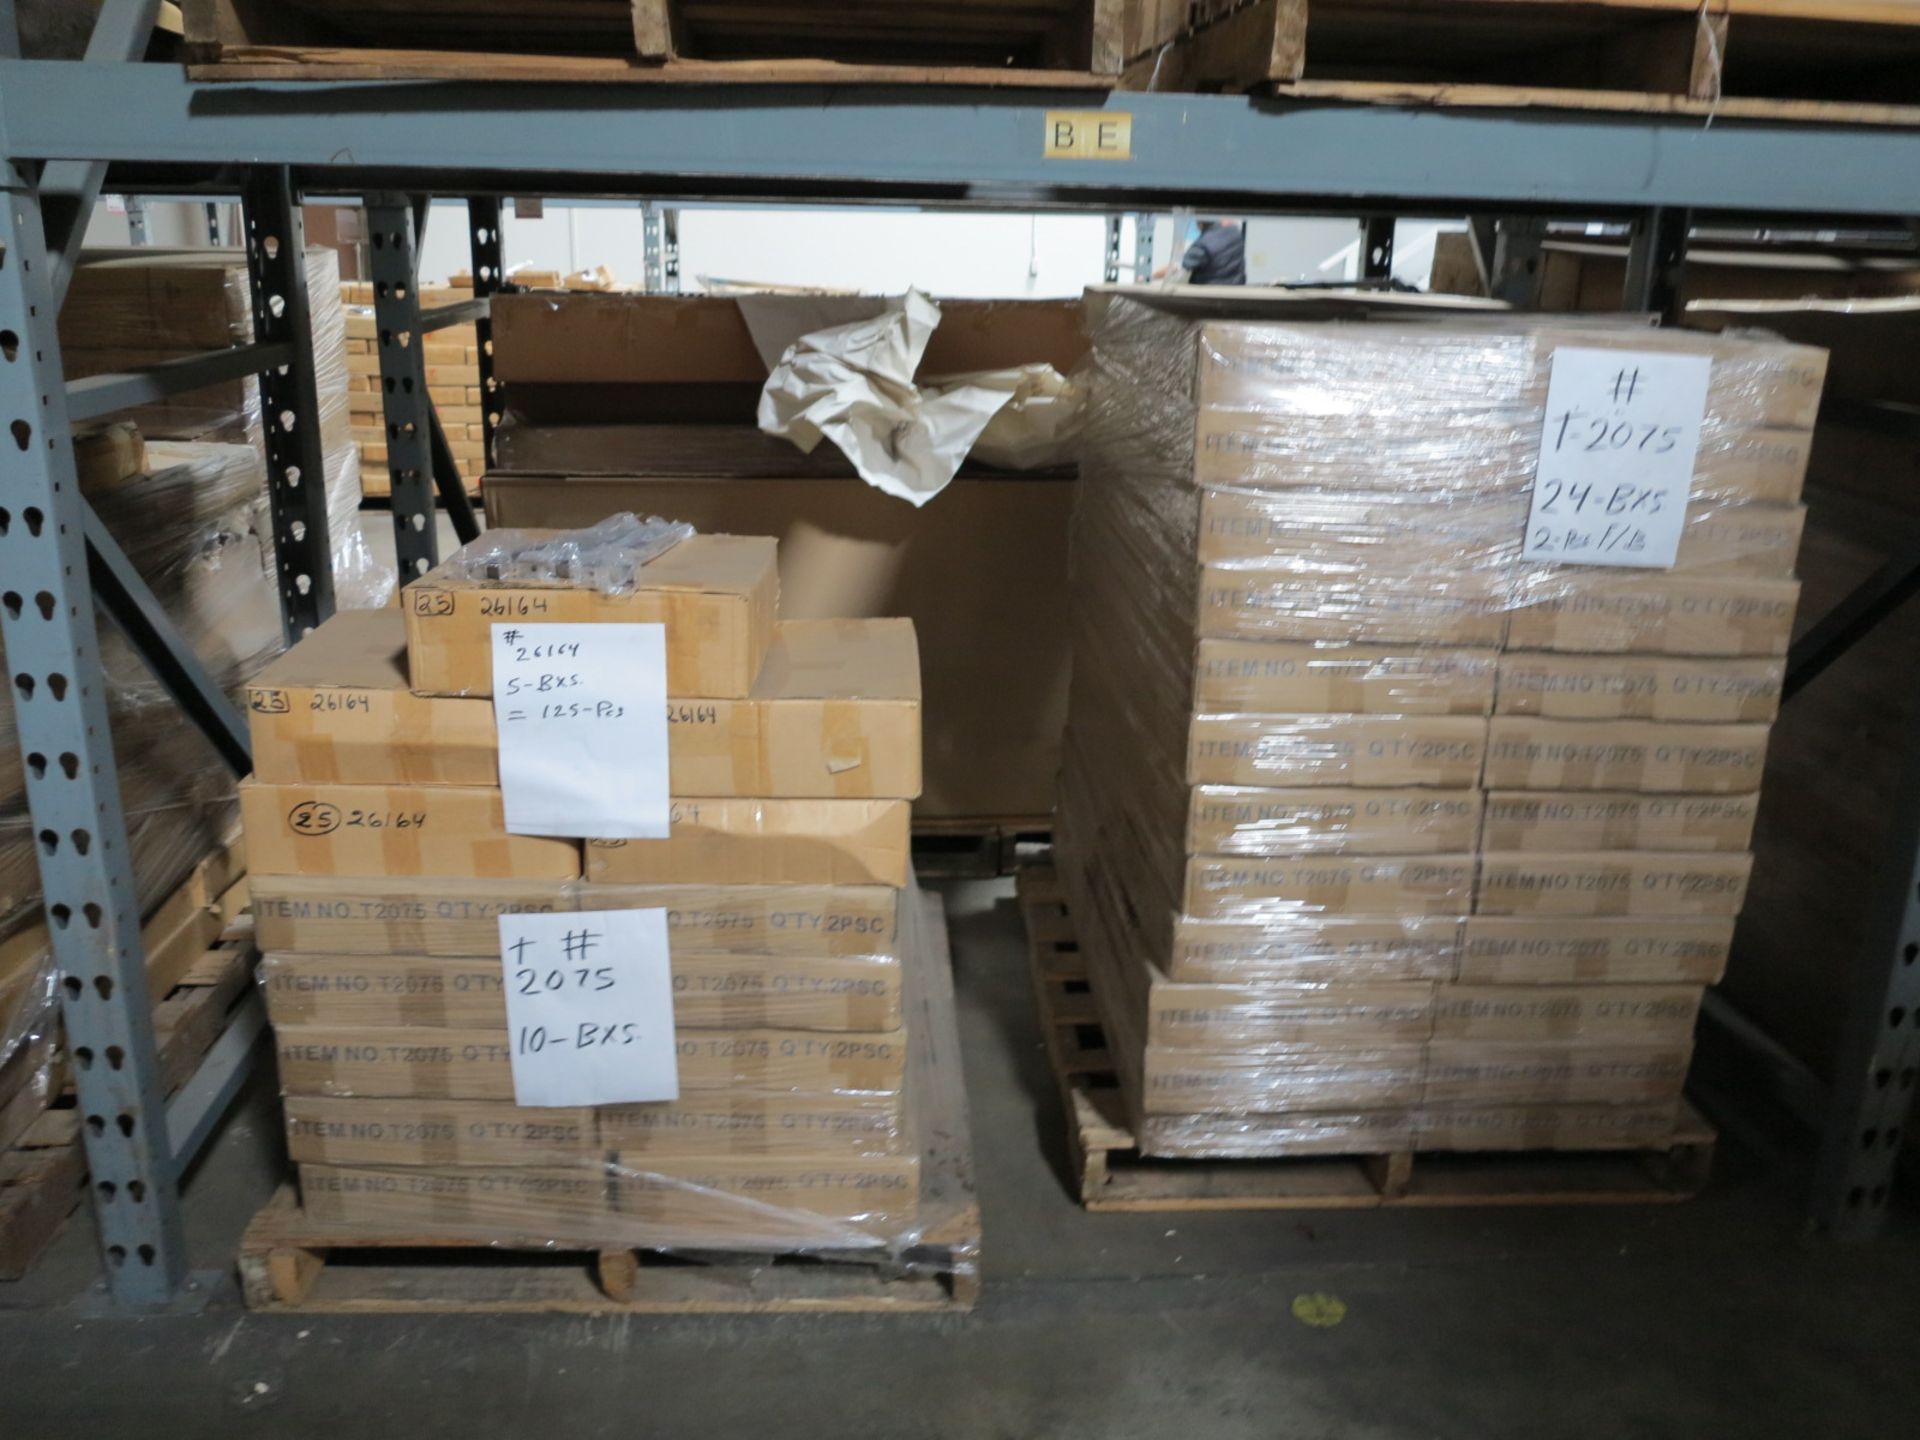 LOT - CONTENTS OF (3) SECTIONS OF PALLET RACK TO INCLUDE: ITEM # 10126, 2 WAY W (2) 16" STR. ARMS, - Bild 4 aus 12